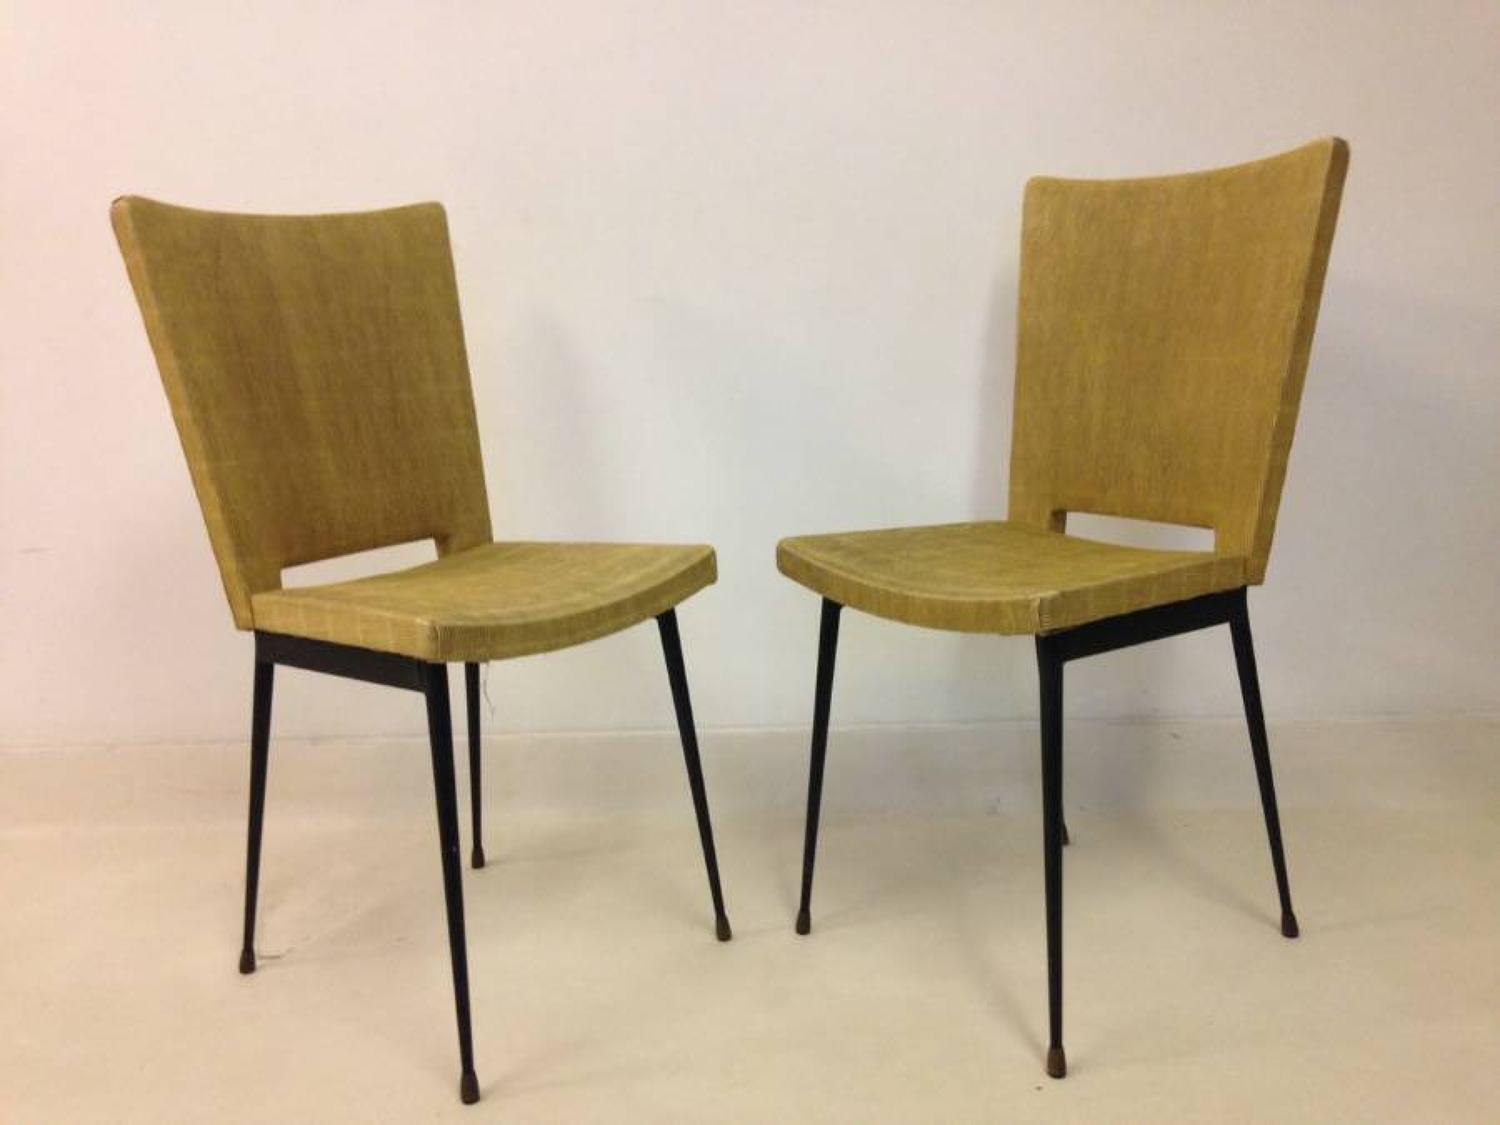 A pair of French 1950s chairs by Colette Gueden